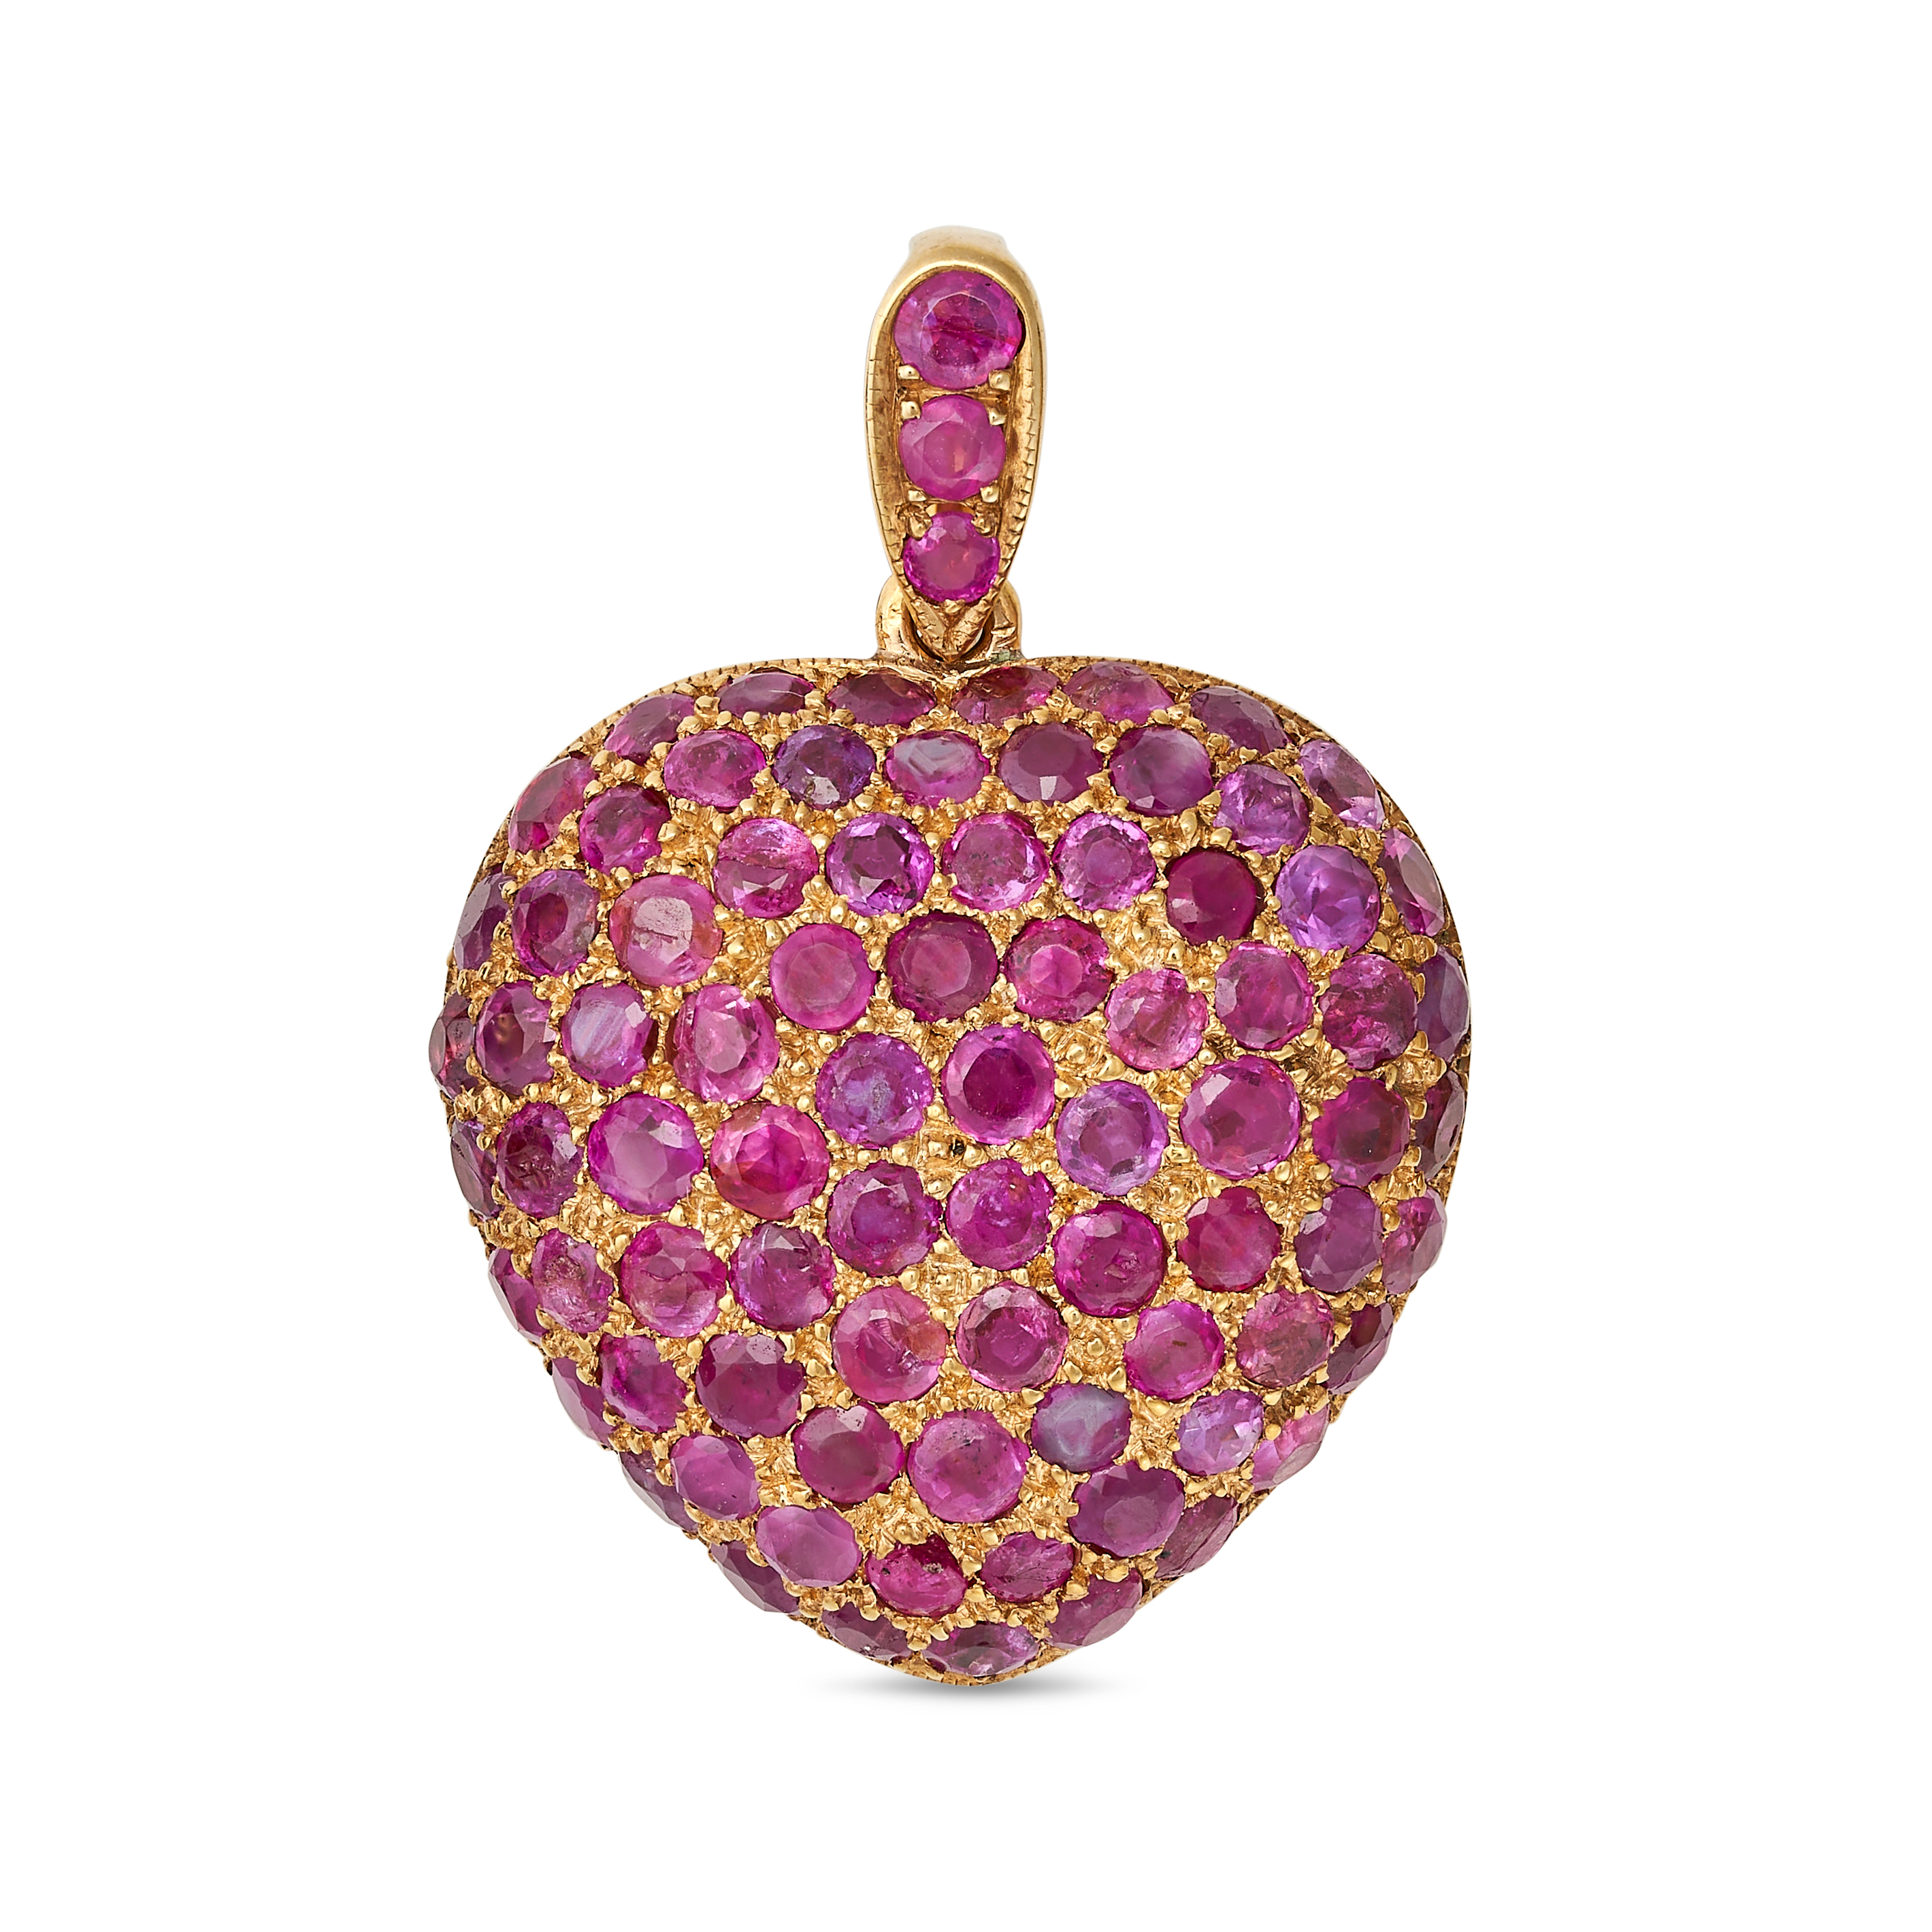 A RUBY HEART PENDANT in yellow gold, designed as a heart set throughout with round cut rubies, fu...